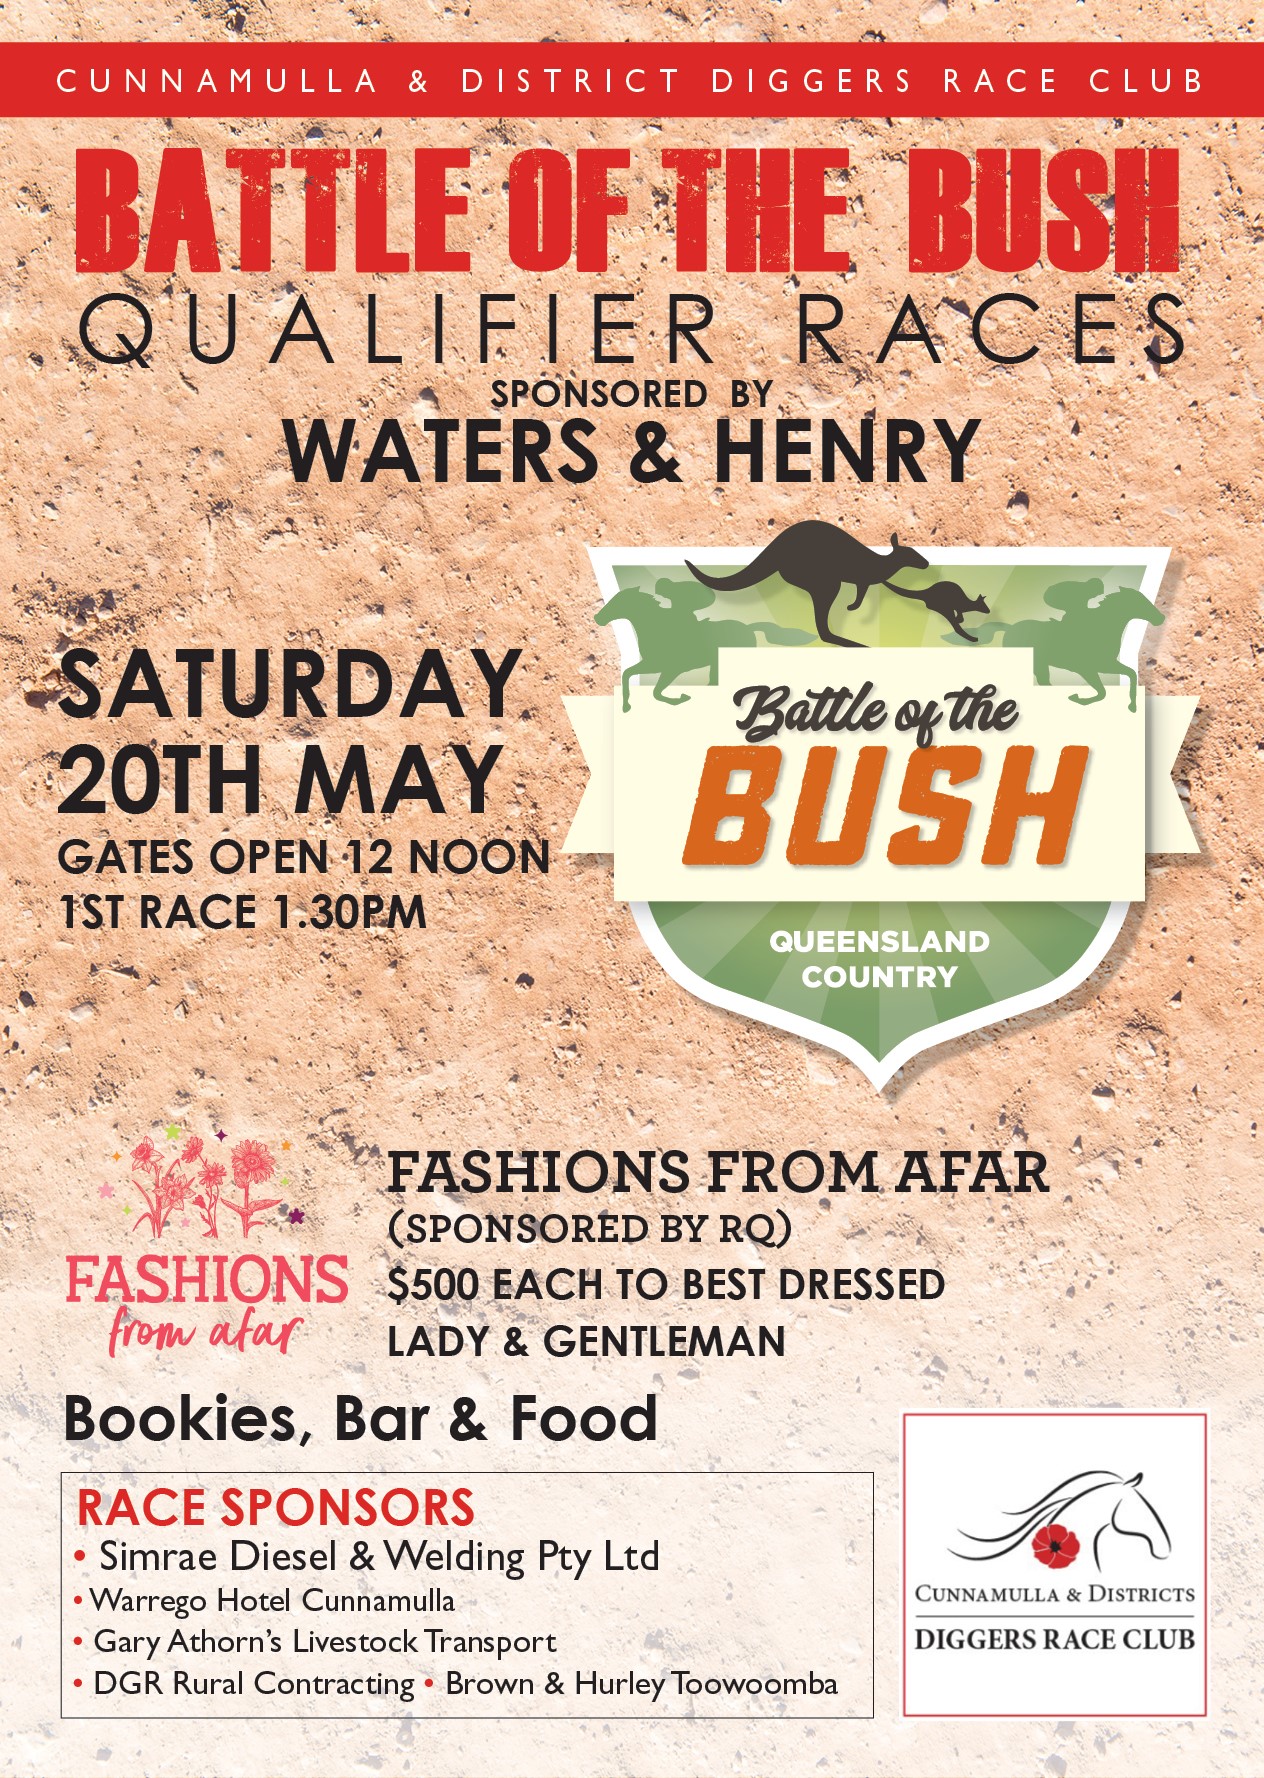 Cunnamulla & Diggers Race Club presents "Battle in the Bush" with racing, bookies, bar and food.